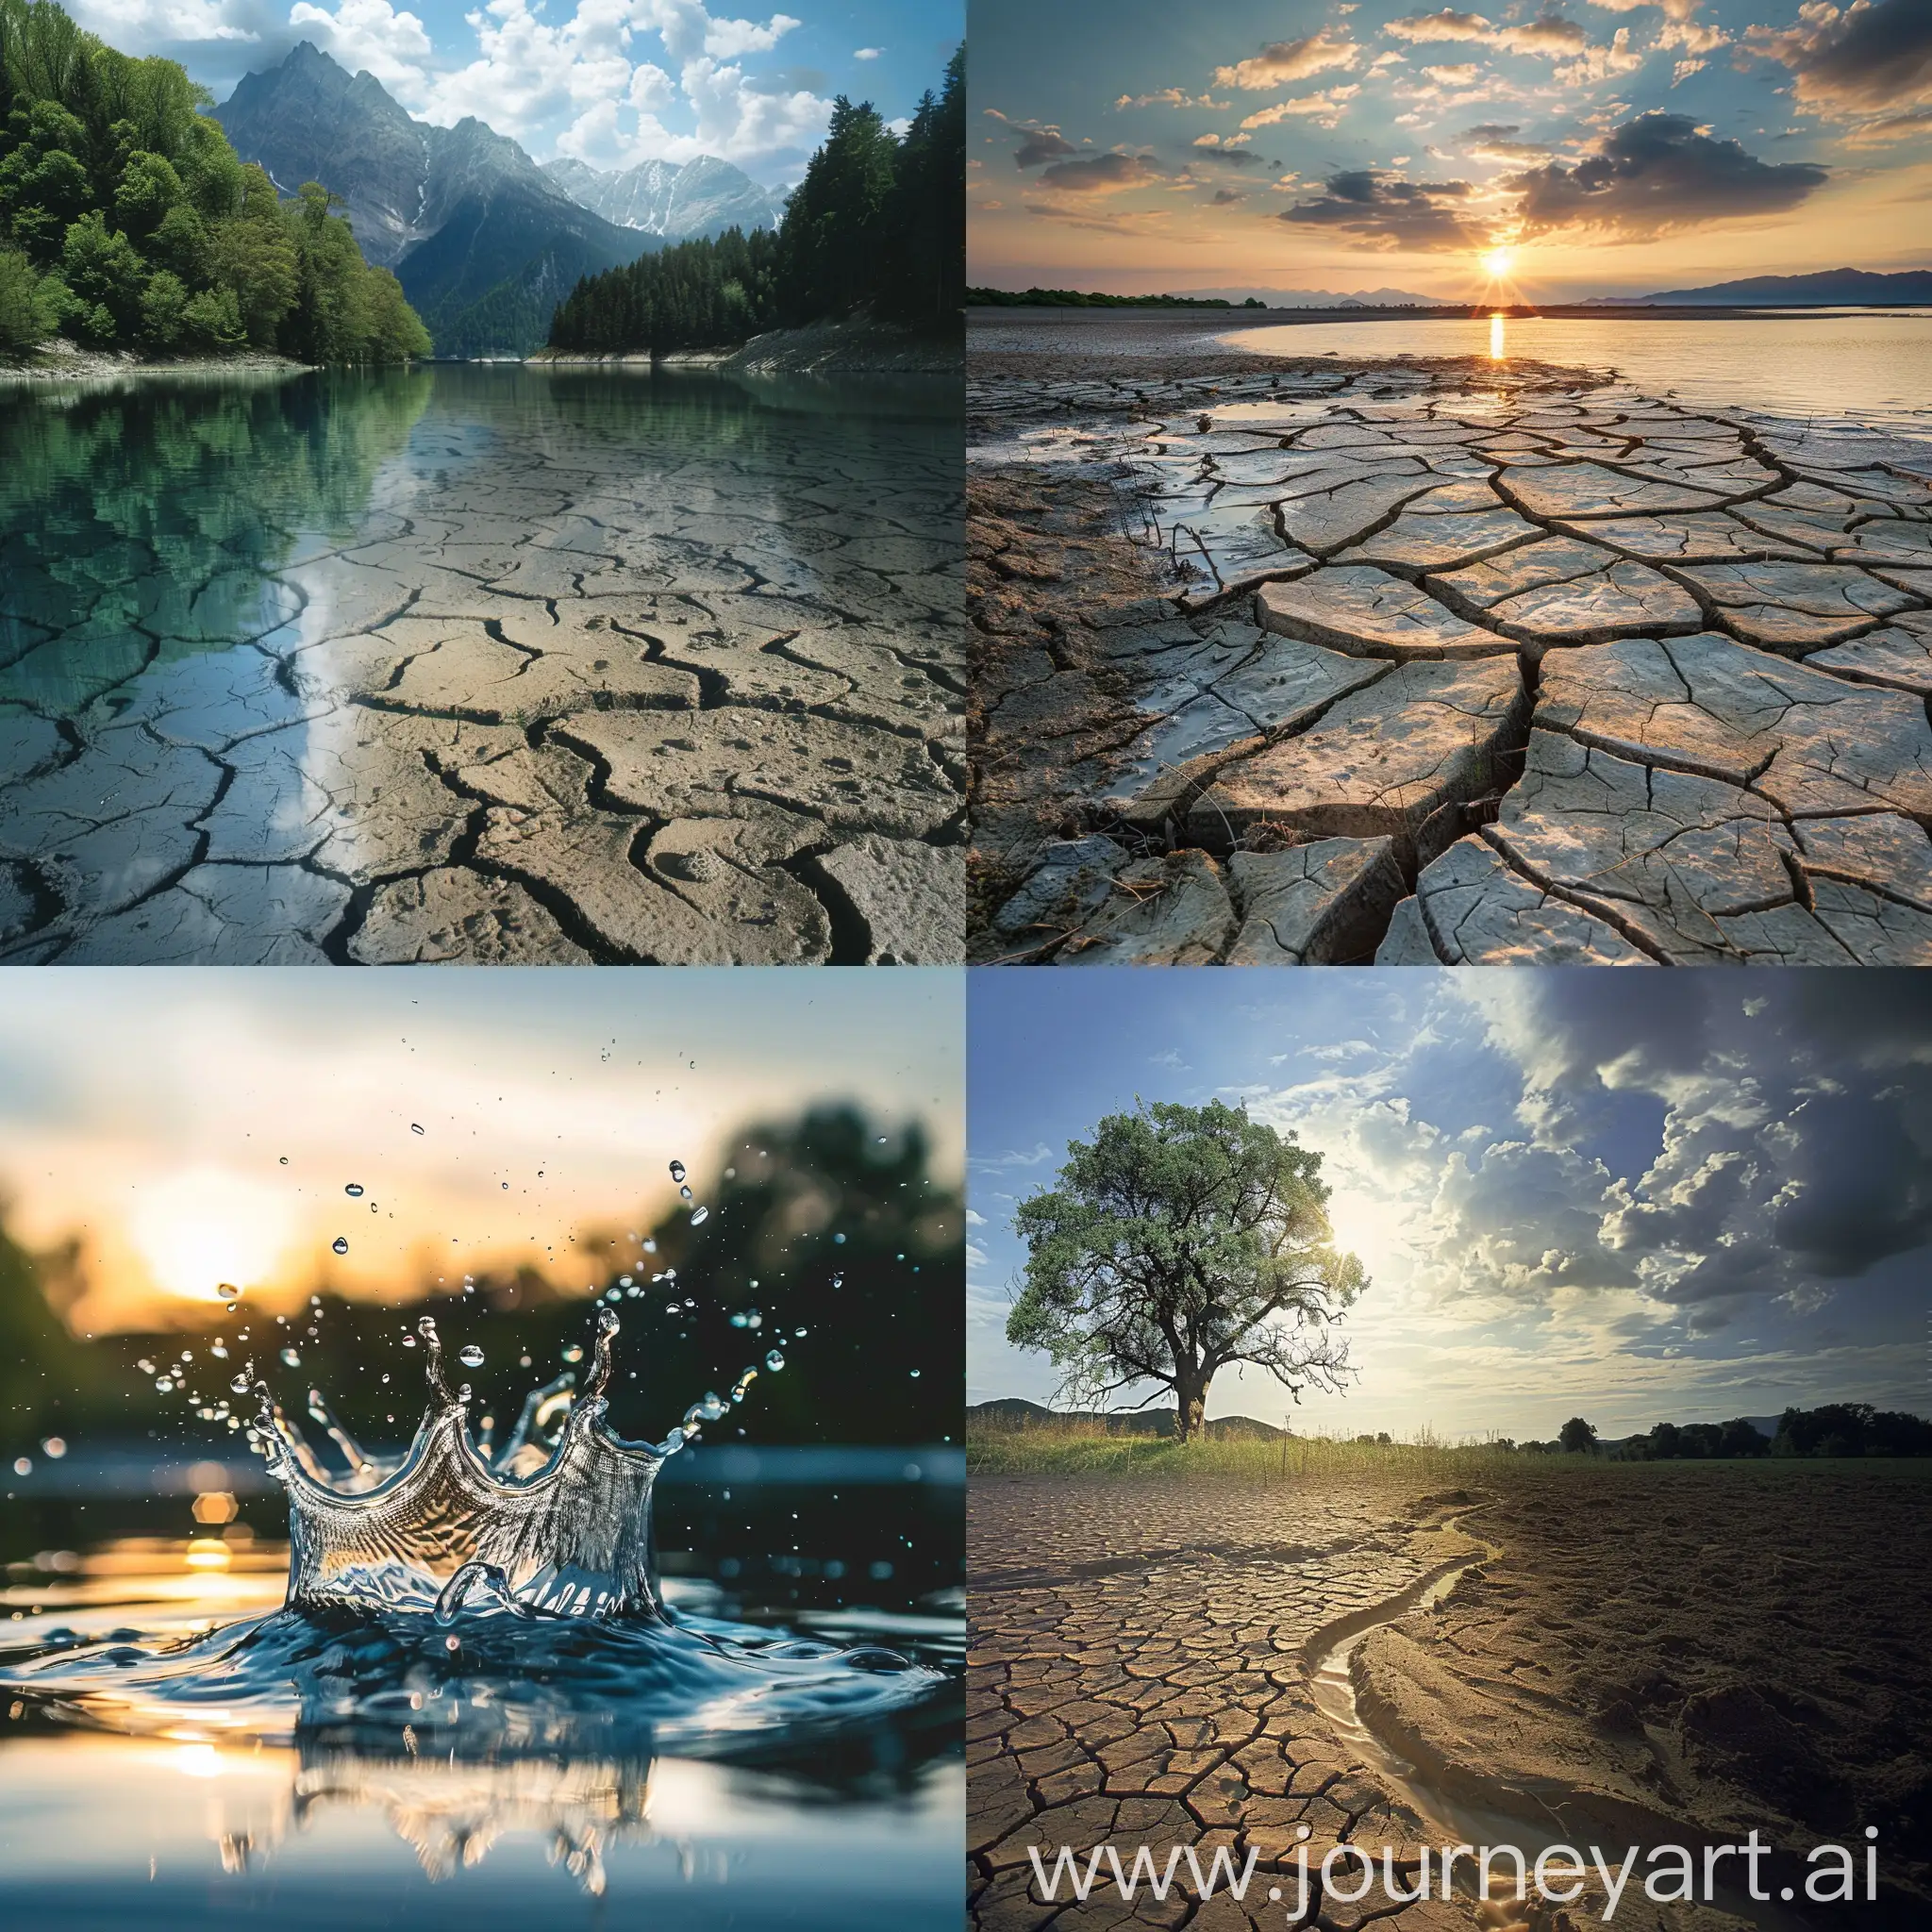 Climate-Change-Effects-on-Water-Resources-Desolate-Landscape-in-V6-Aspect-Ratio